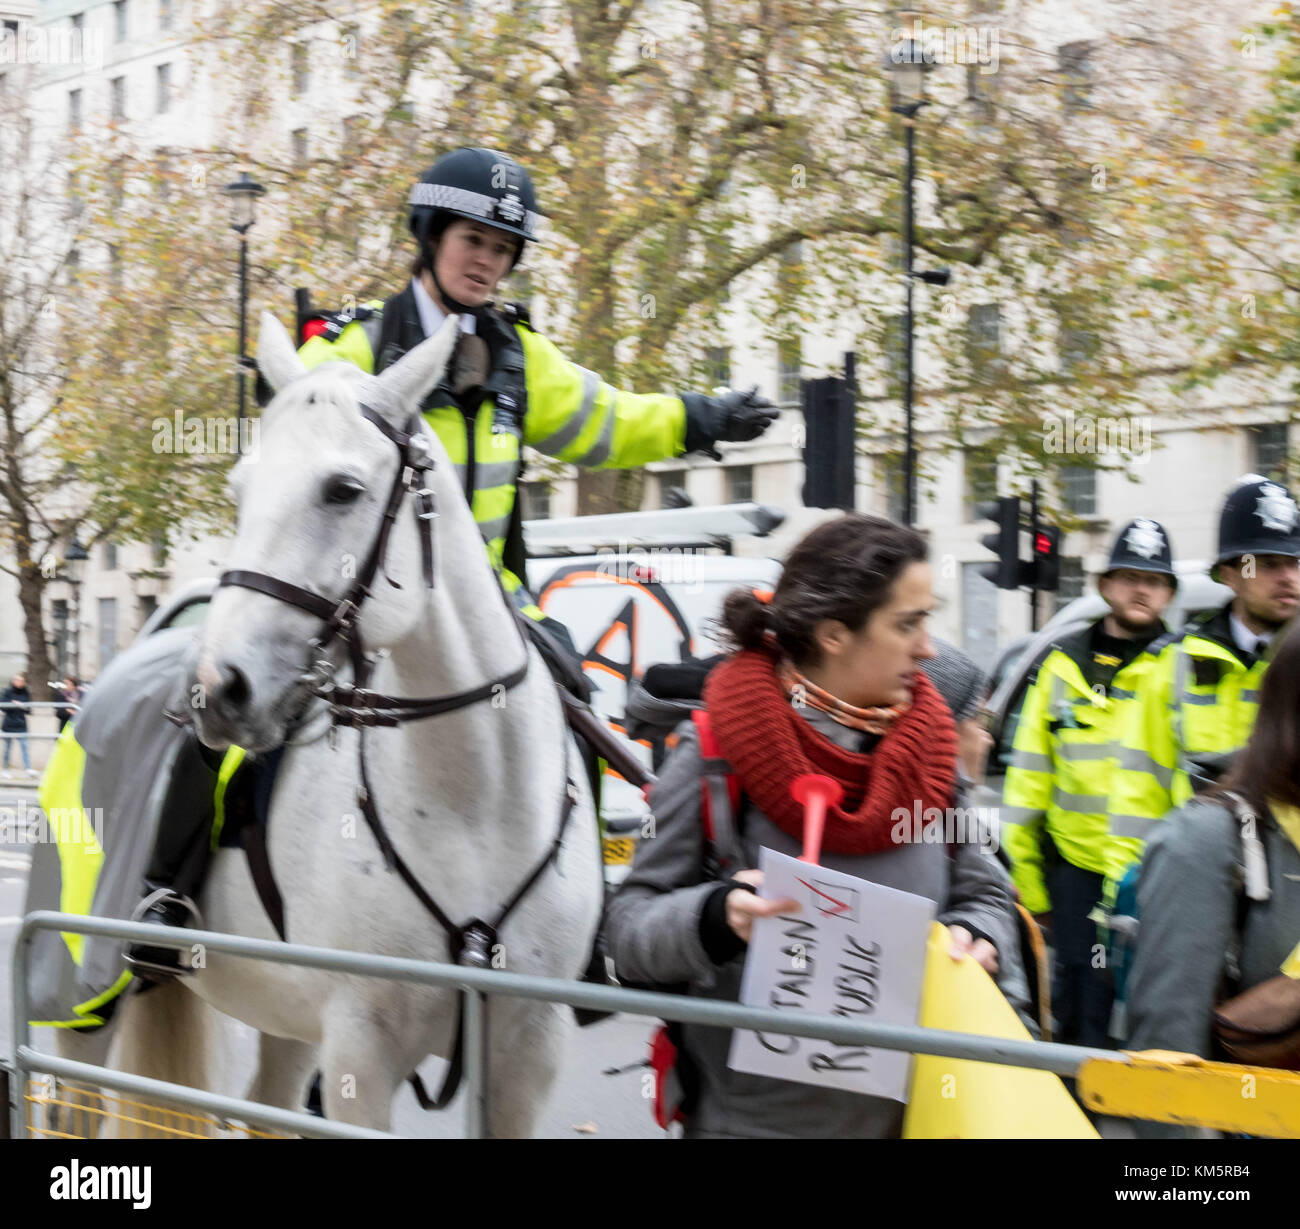 London, UK. 5th December, 2017. Mounted police move Catalonian protesters blockading Downing Street to protest at the visit of Spanish Prime Minister Marino Rajoy Credit: Ian Davidson/Alamy Live News Stock Photo